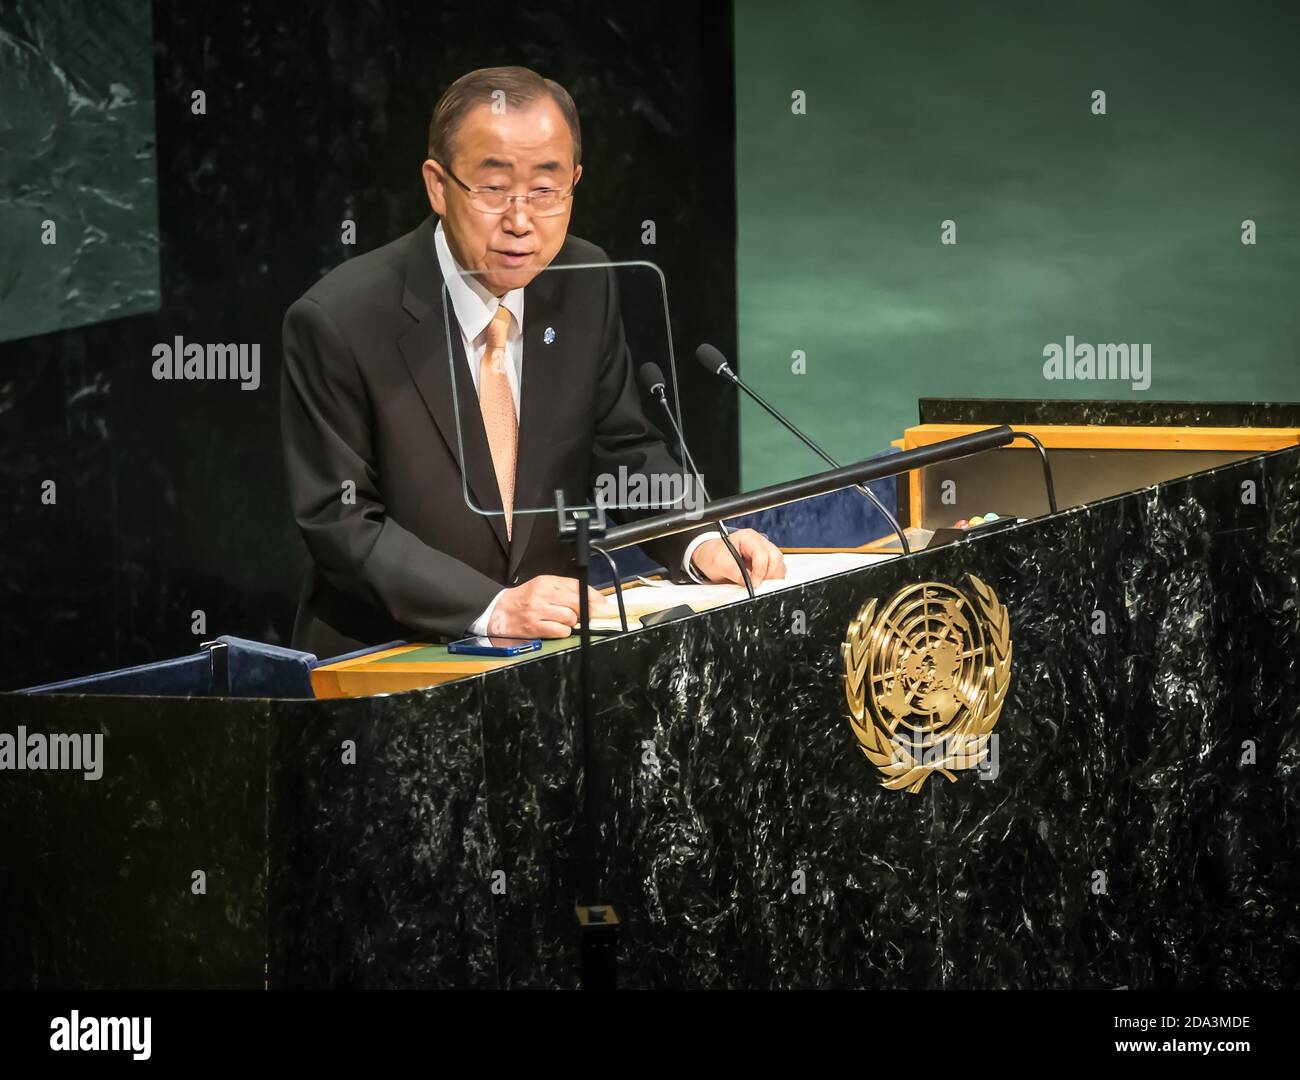 NEW YORK, USA - Sep 20, 2016: UN Secretary General Ban Ki-moon at the opening of the 71st session of the United Nations General Assembly in New York Stock Photo